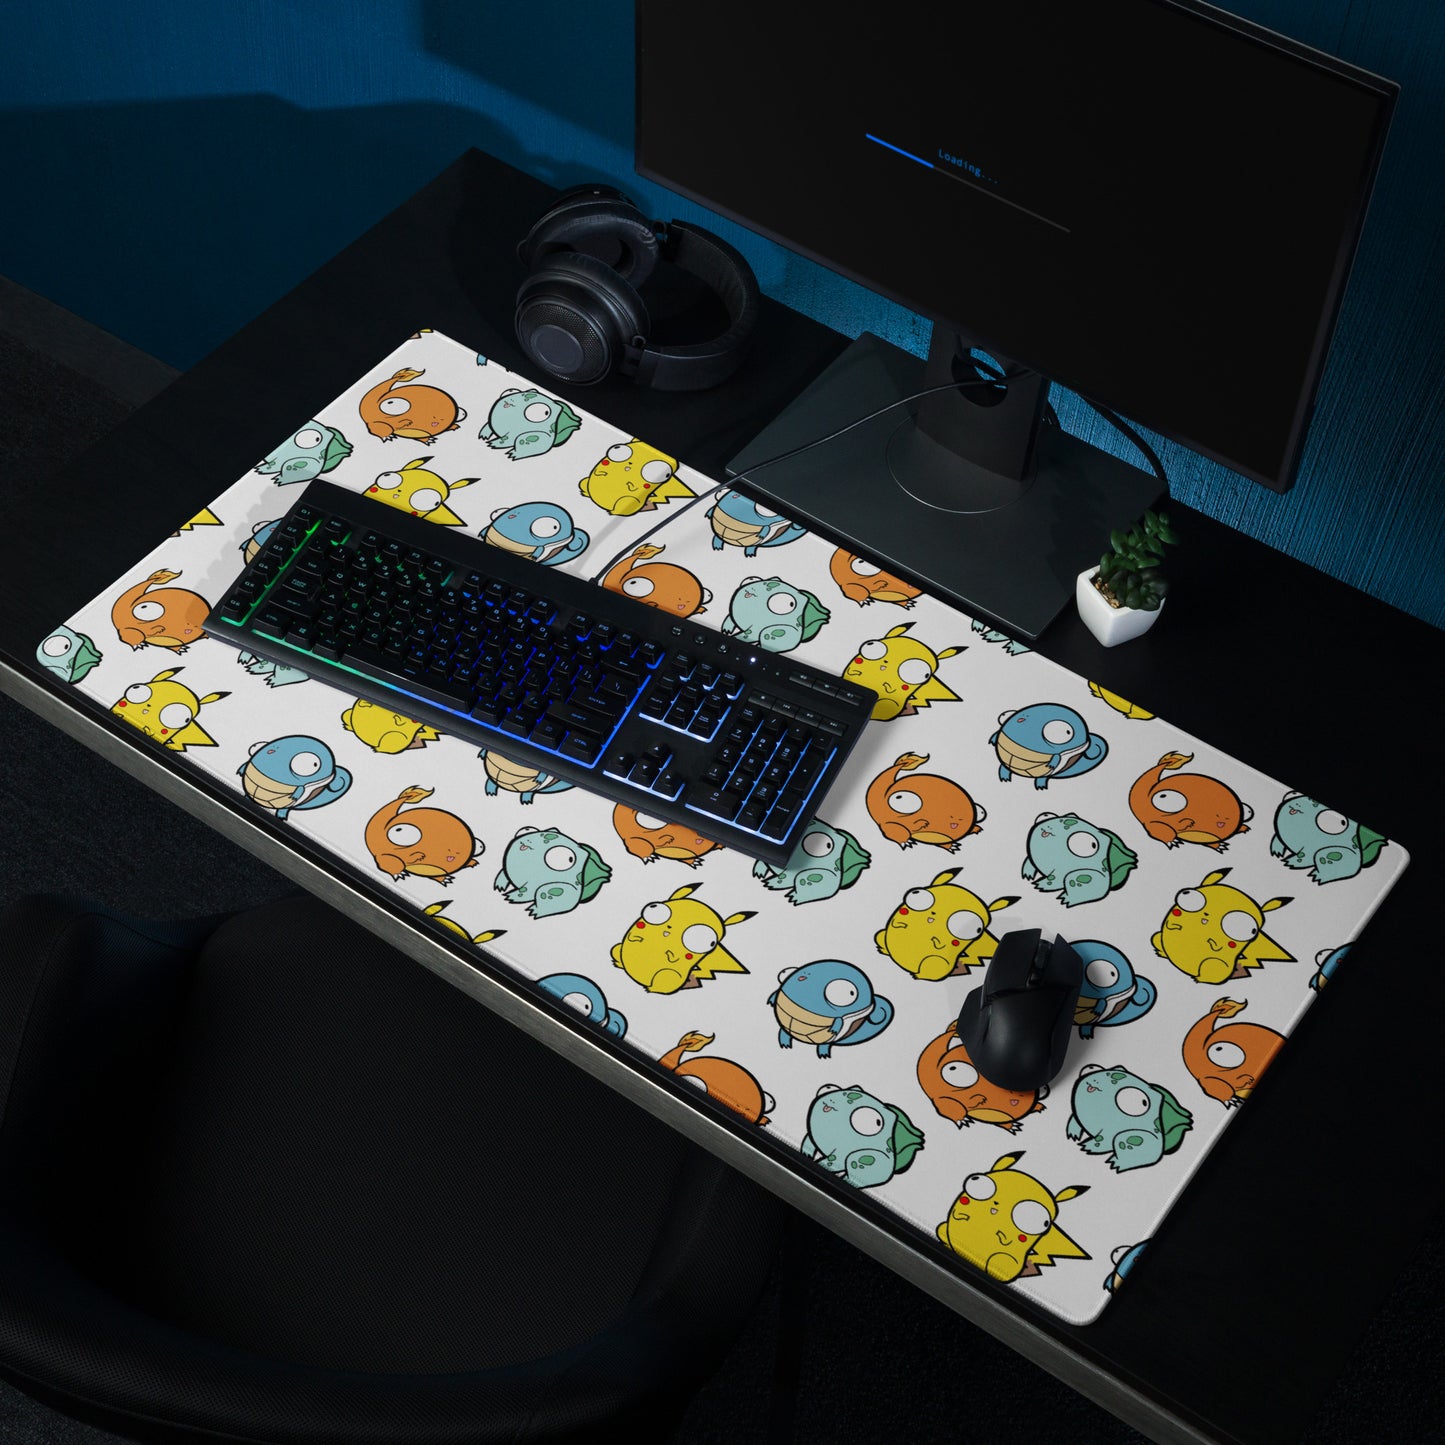 Pokederps Gaming mouse pad  Level 1 Gamers 36″×18″  